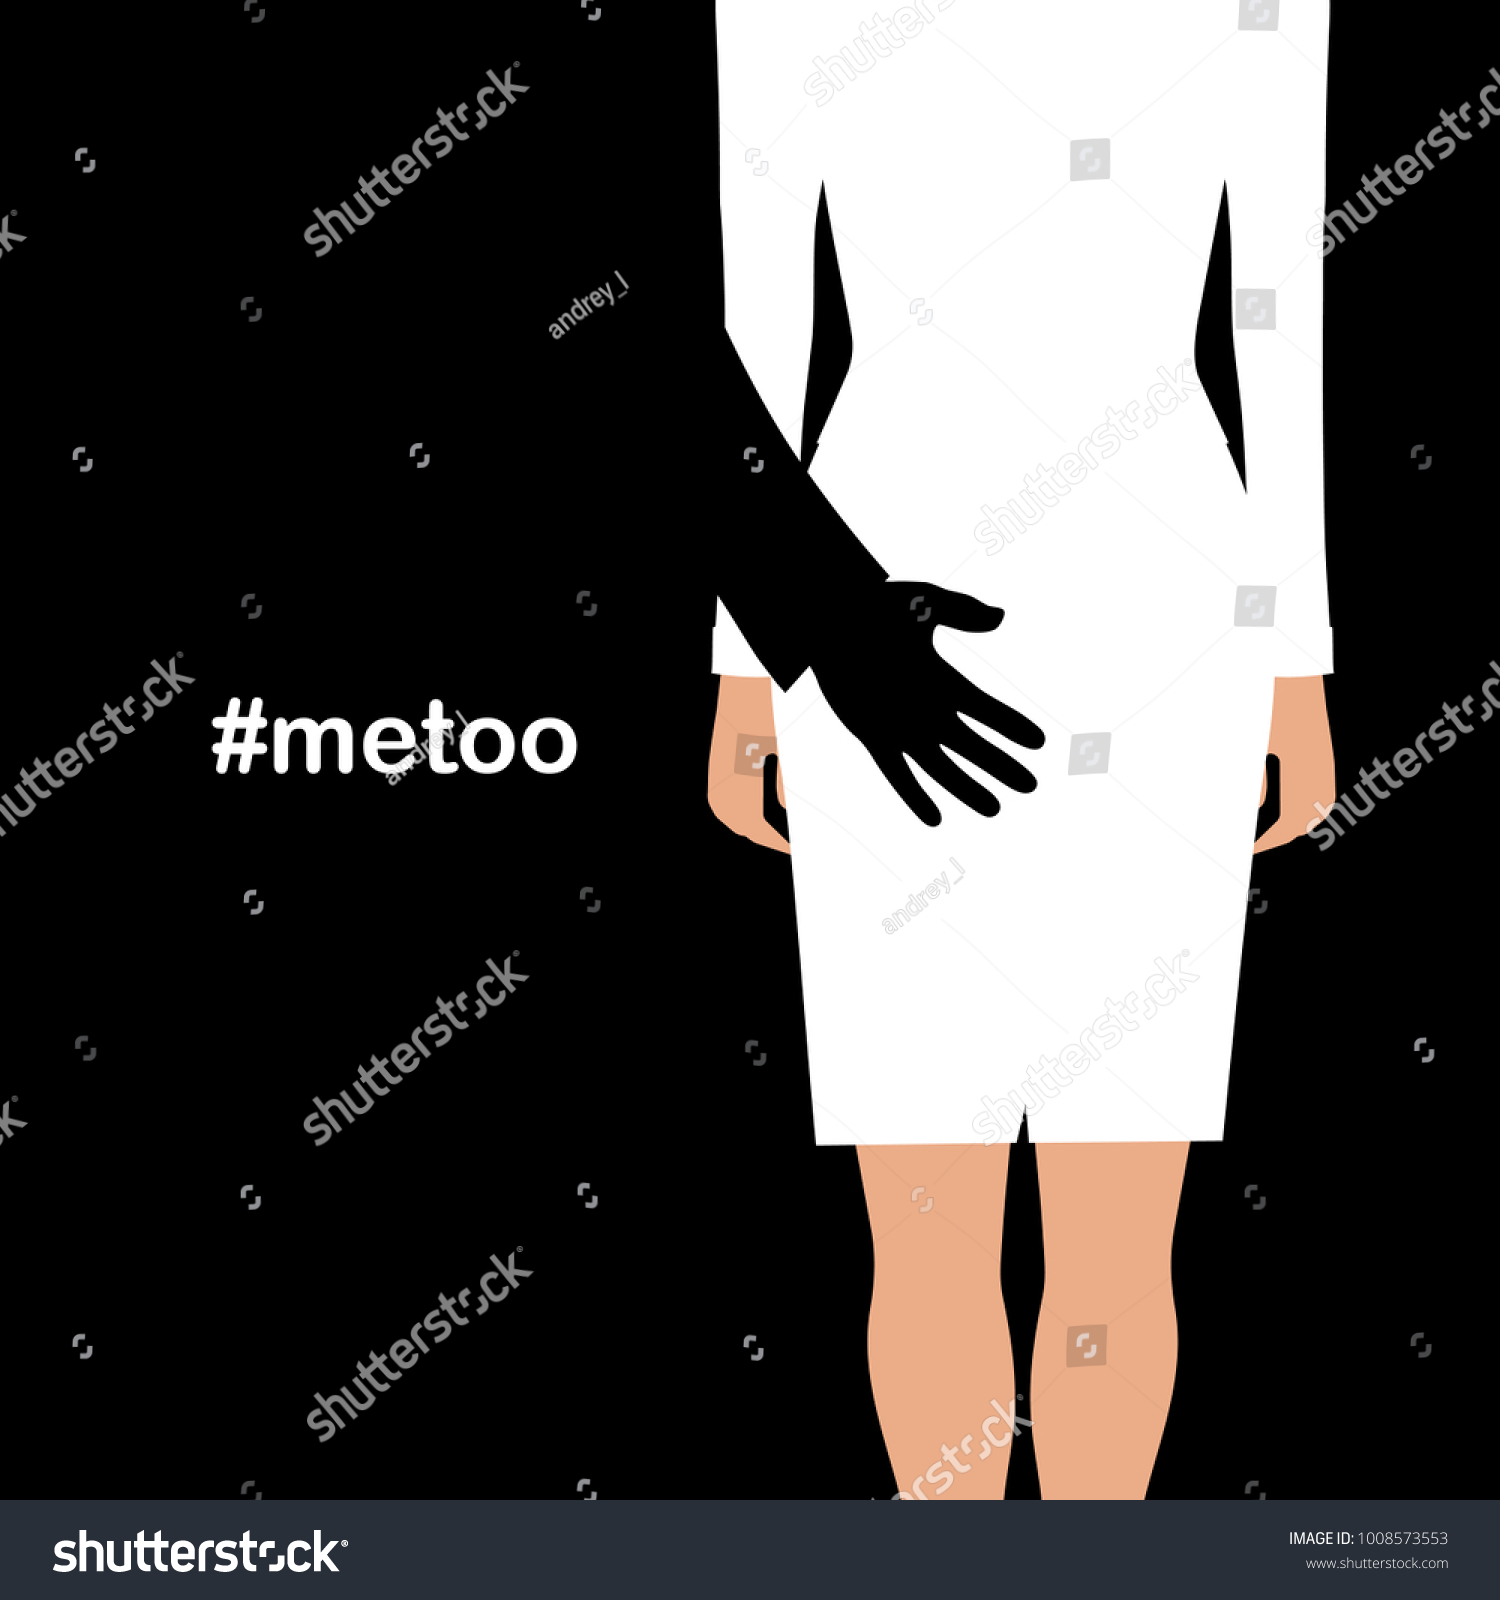 19 Sexual Harassment Ass Stock Illustrations Images And Vectors Shutterstock 7320